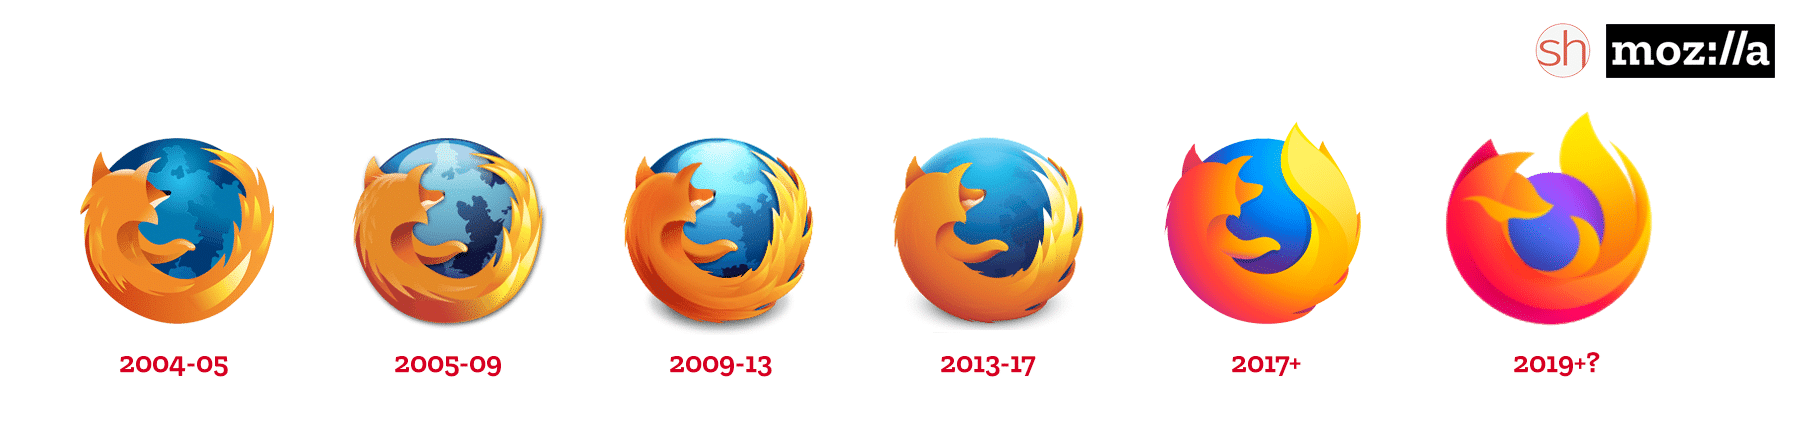 New Firefox Logo Live On Most Mozilla Services Except The Main